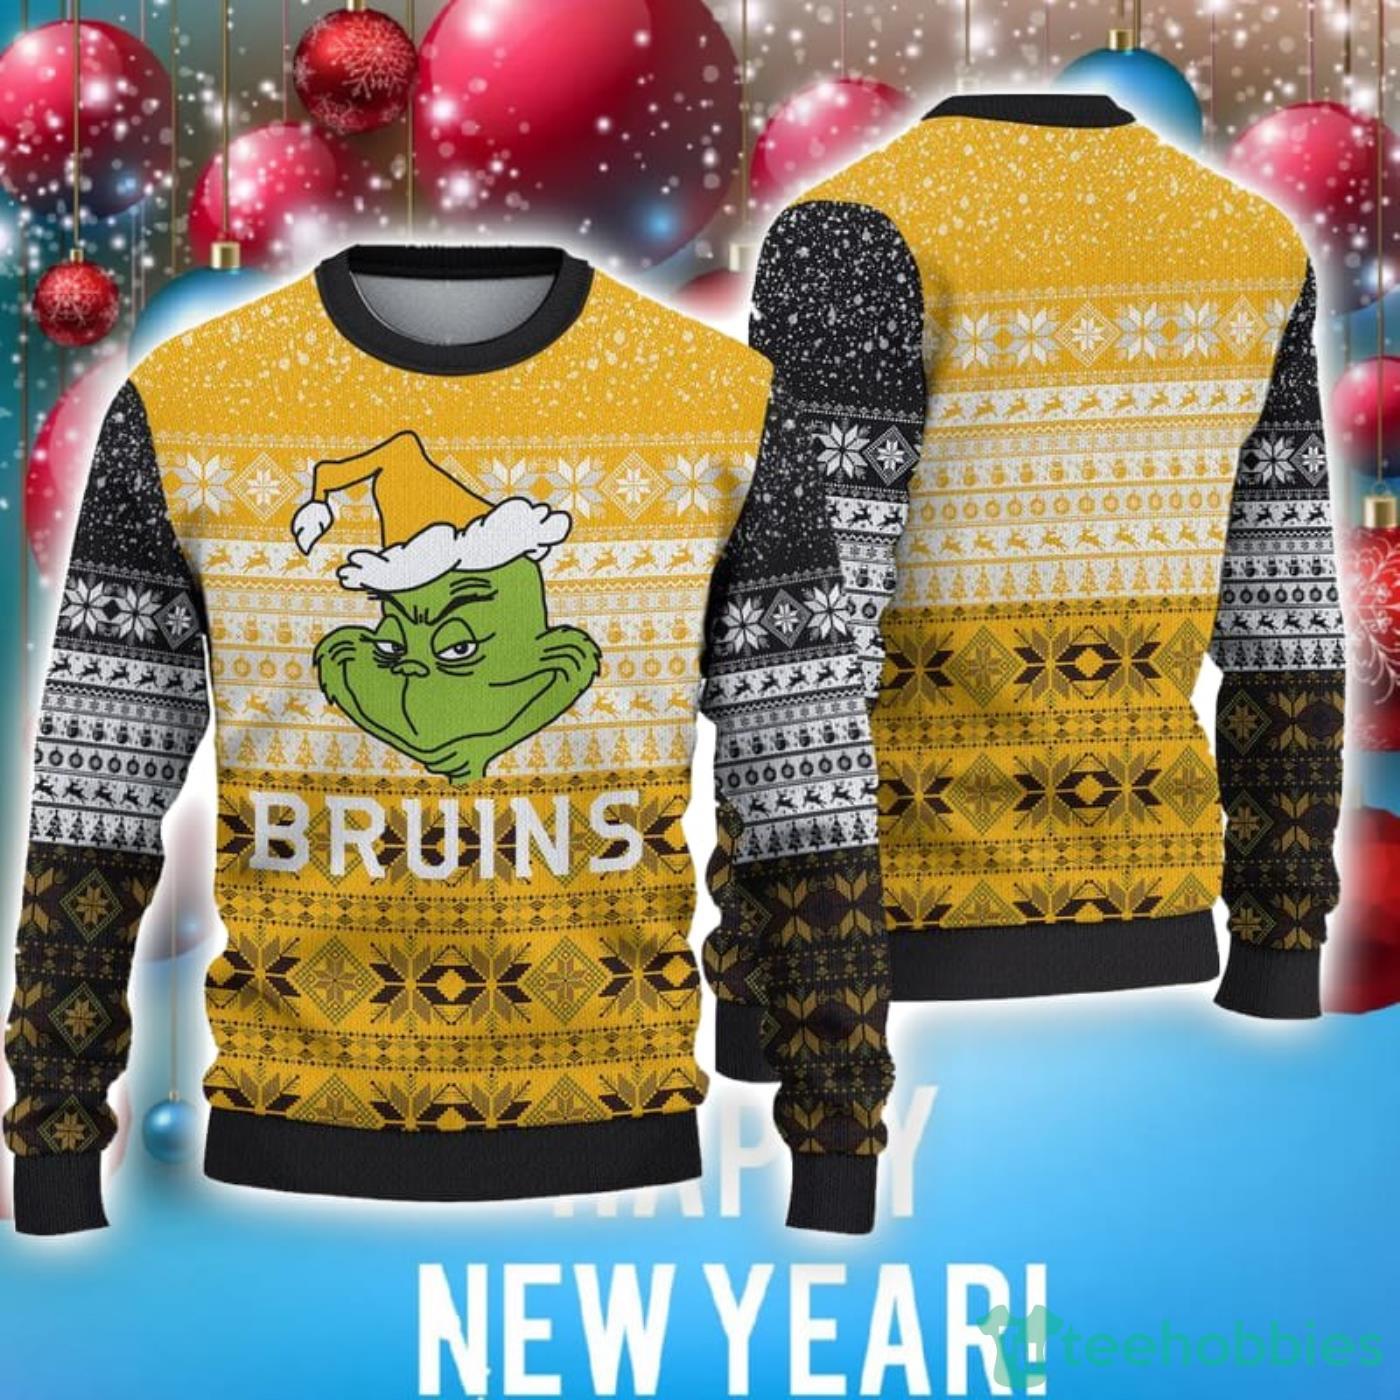 Boston Bruins Christmas Grch Special Trend Ugly Christmas Sweater Product Photo 1